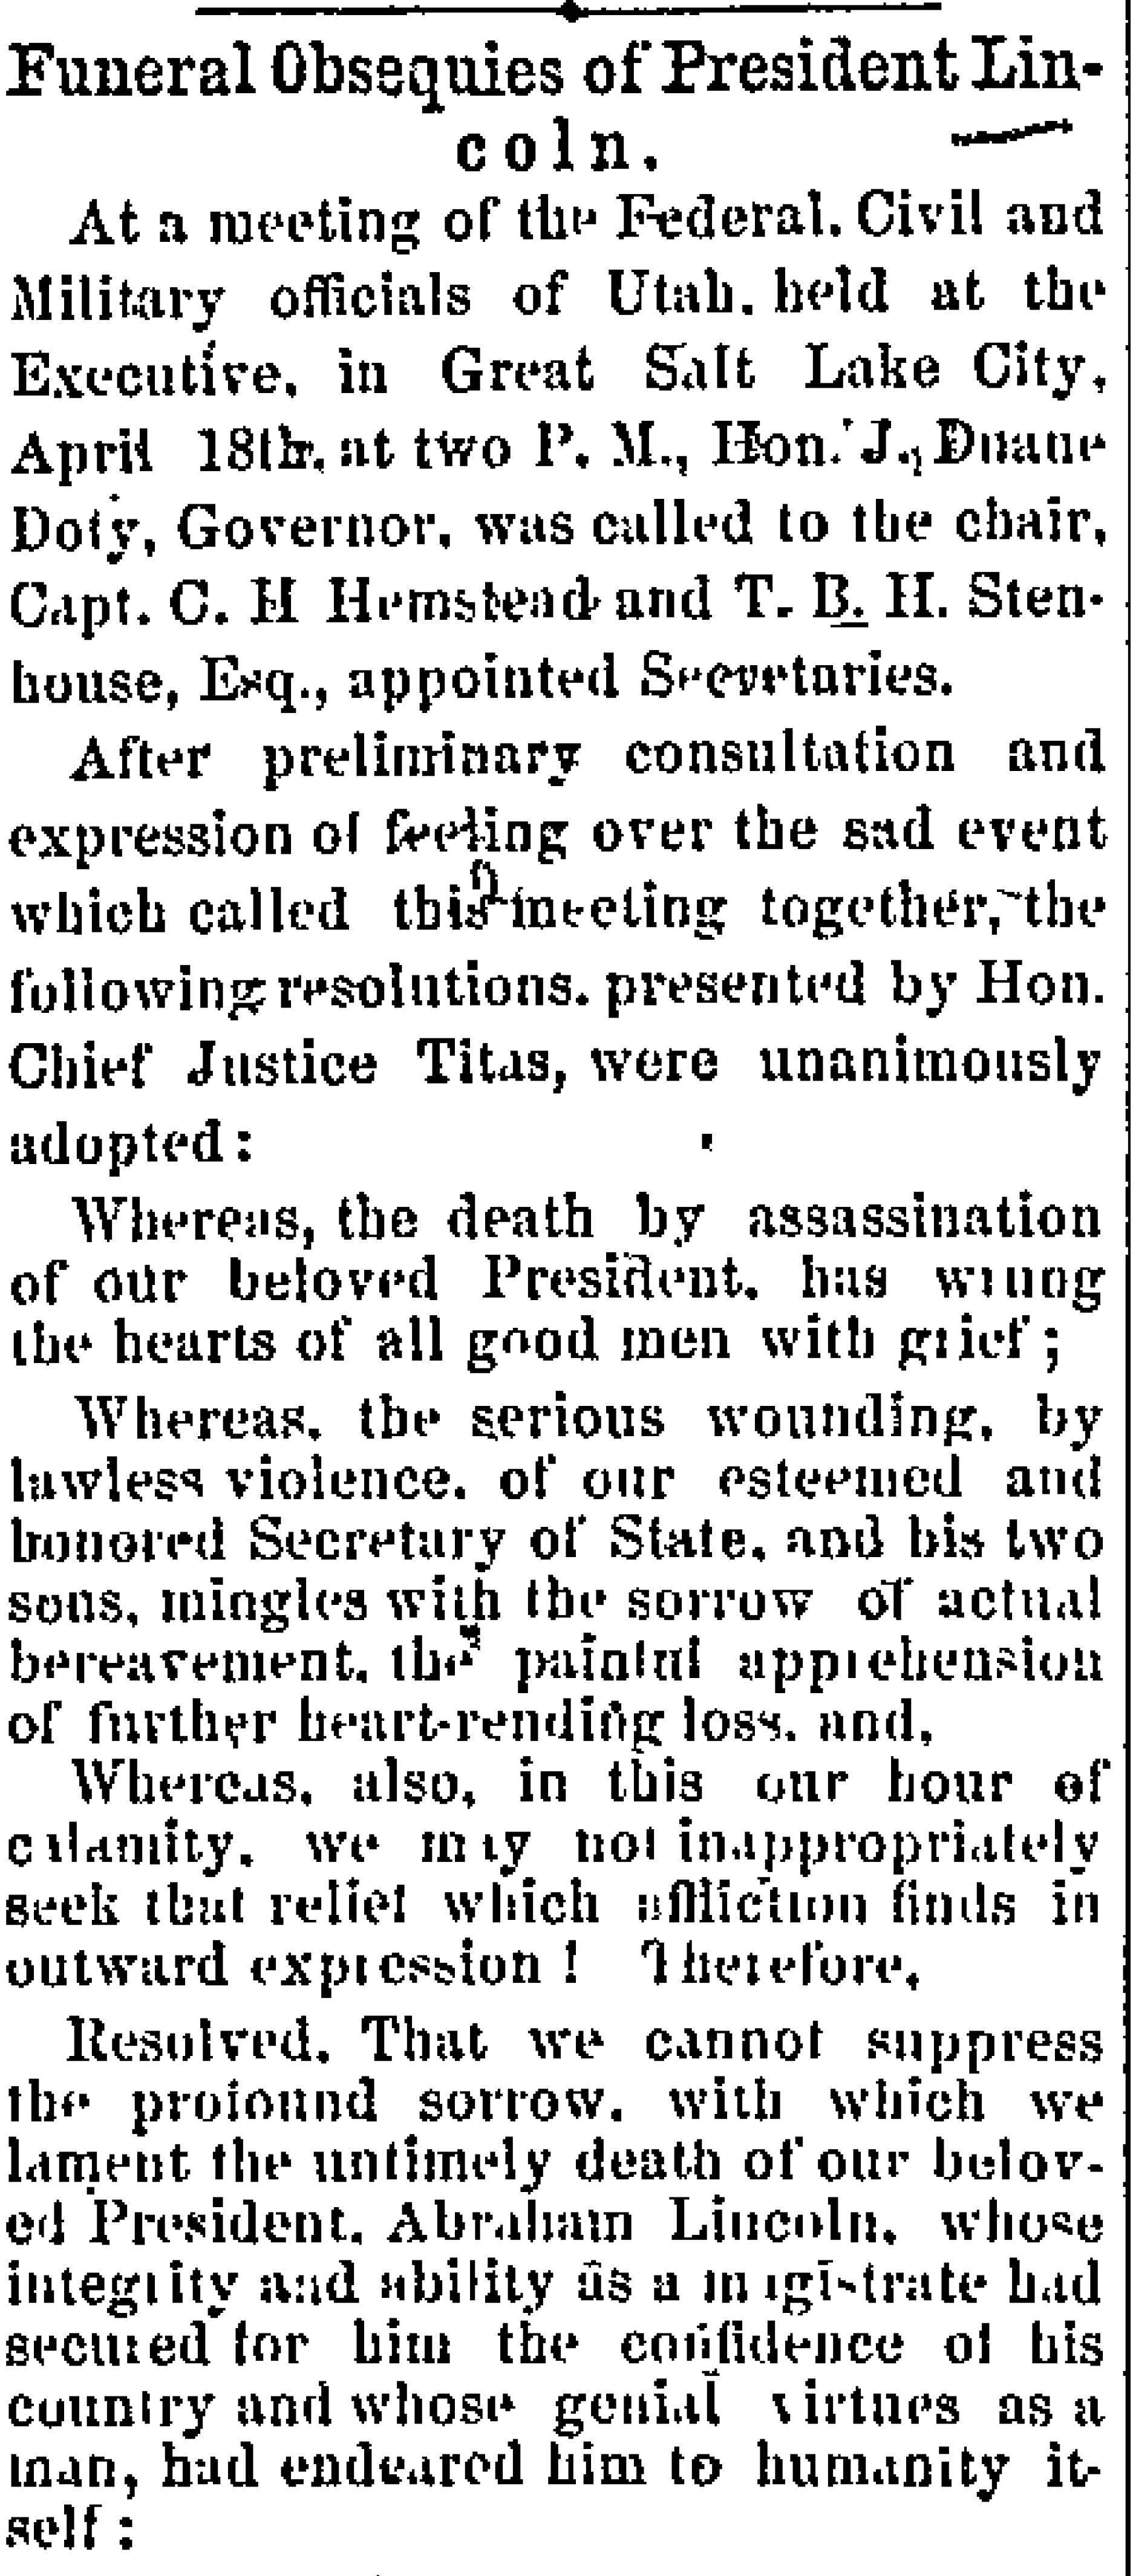 Funeral Obsequies of President Lincoln